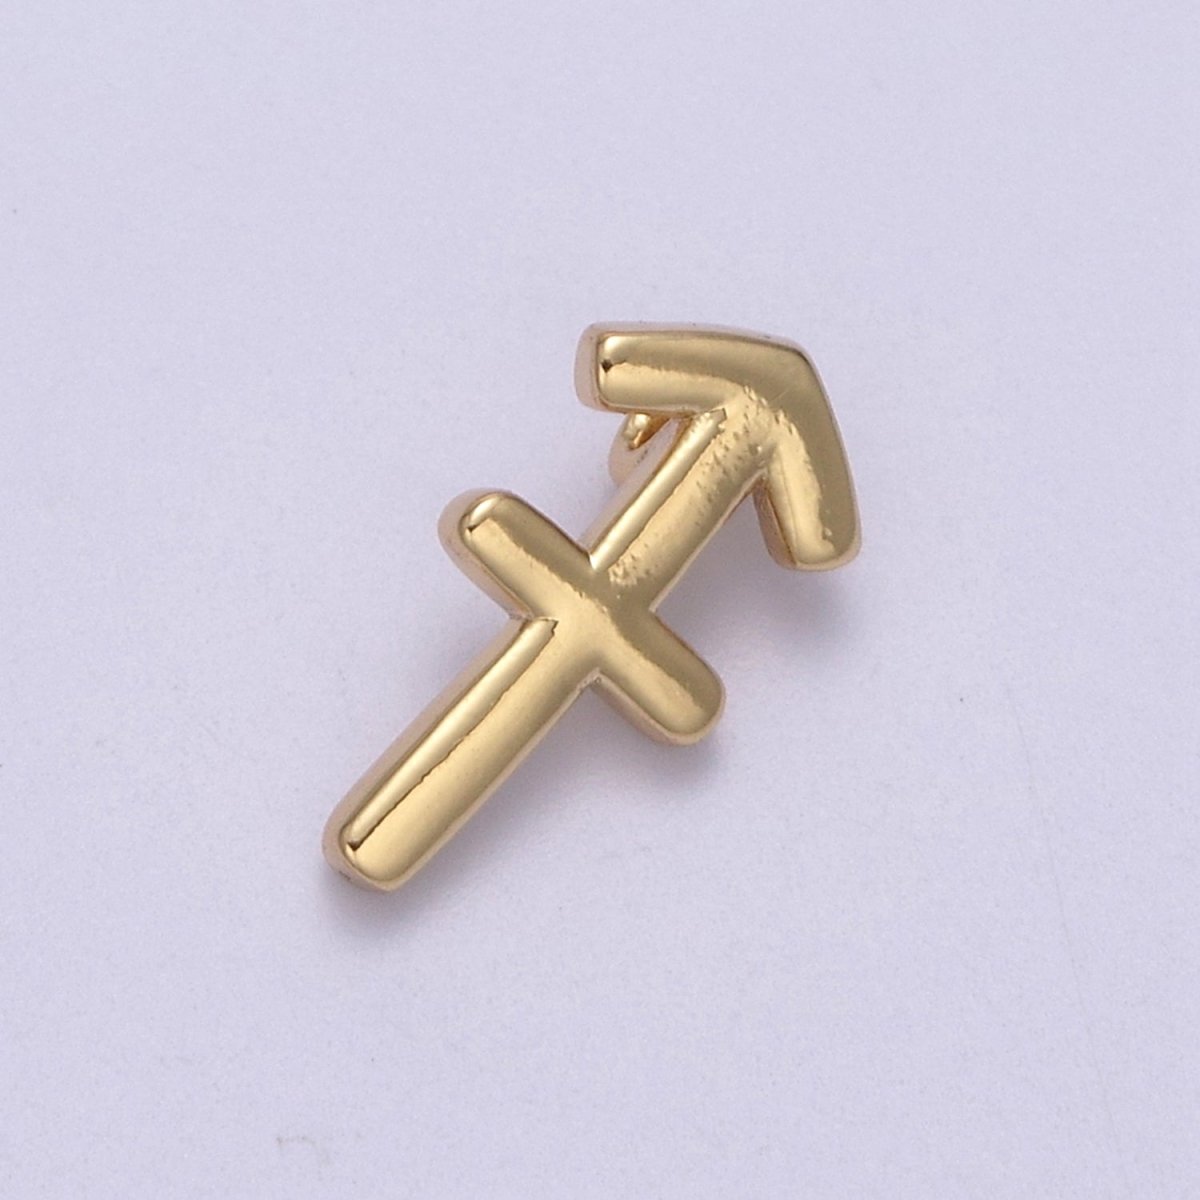 Small Zodiac Charms 14k gold Filled Astrological Zodiac Signs, Horoscope Symbols, Birthday, Astrology Charm for Bracelet Necklace Supply A-889-A-900 - DLUXCA